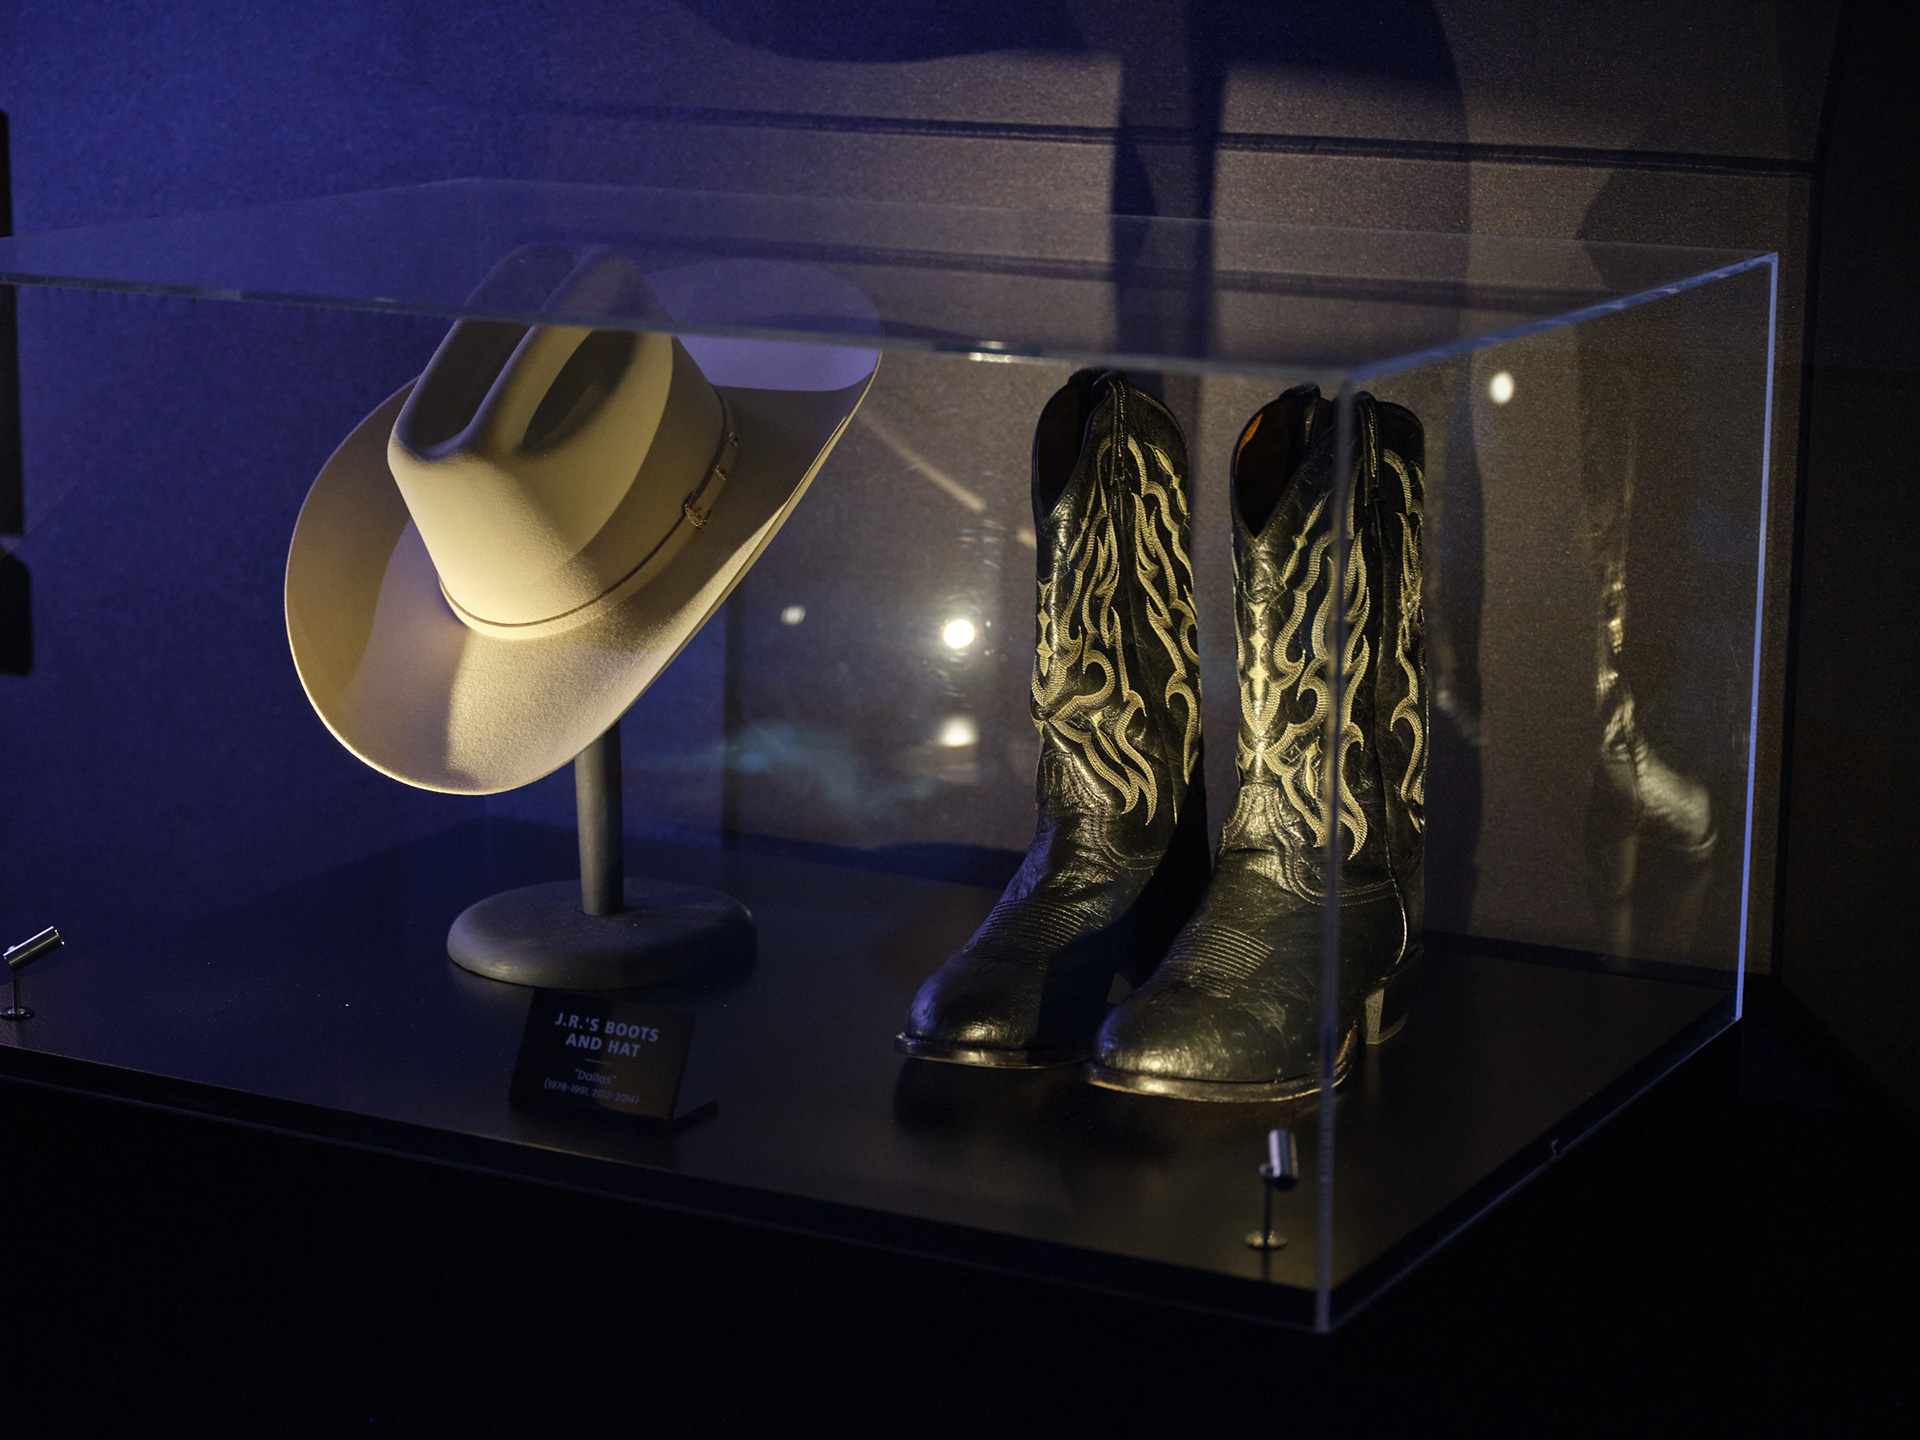 a-local-tour-through-entertainment-history-3-j-r-boots-and-hat-dallas